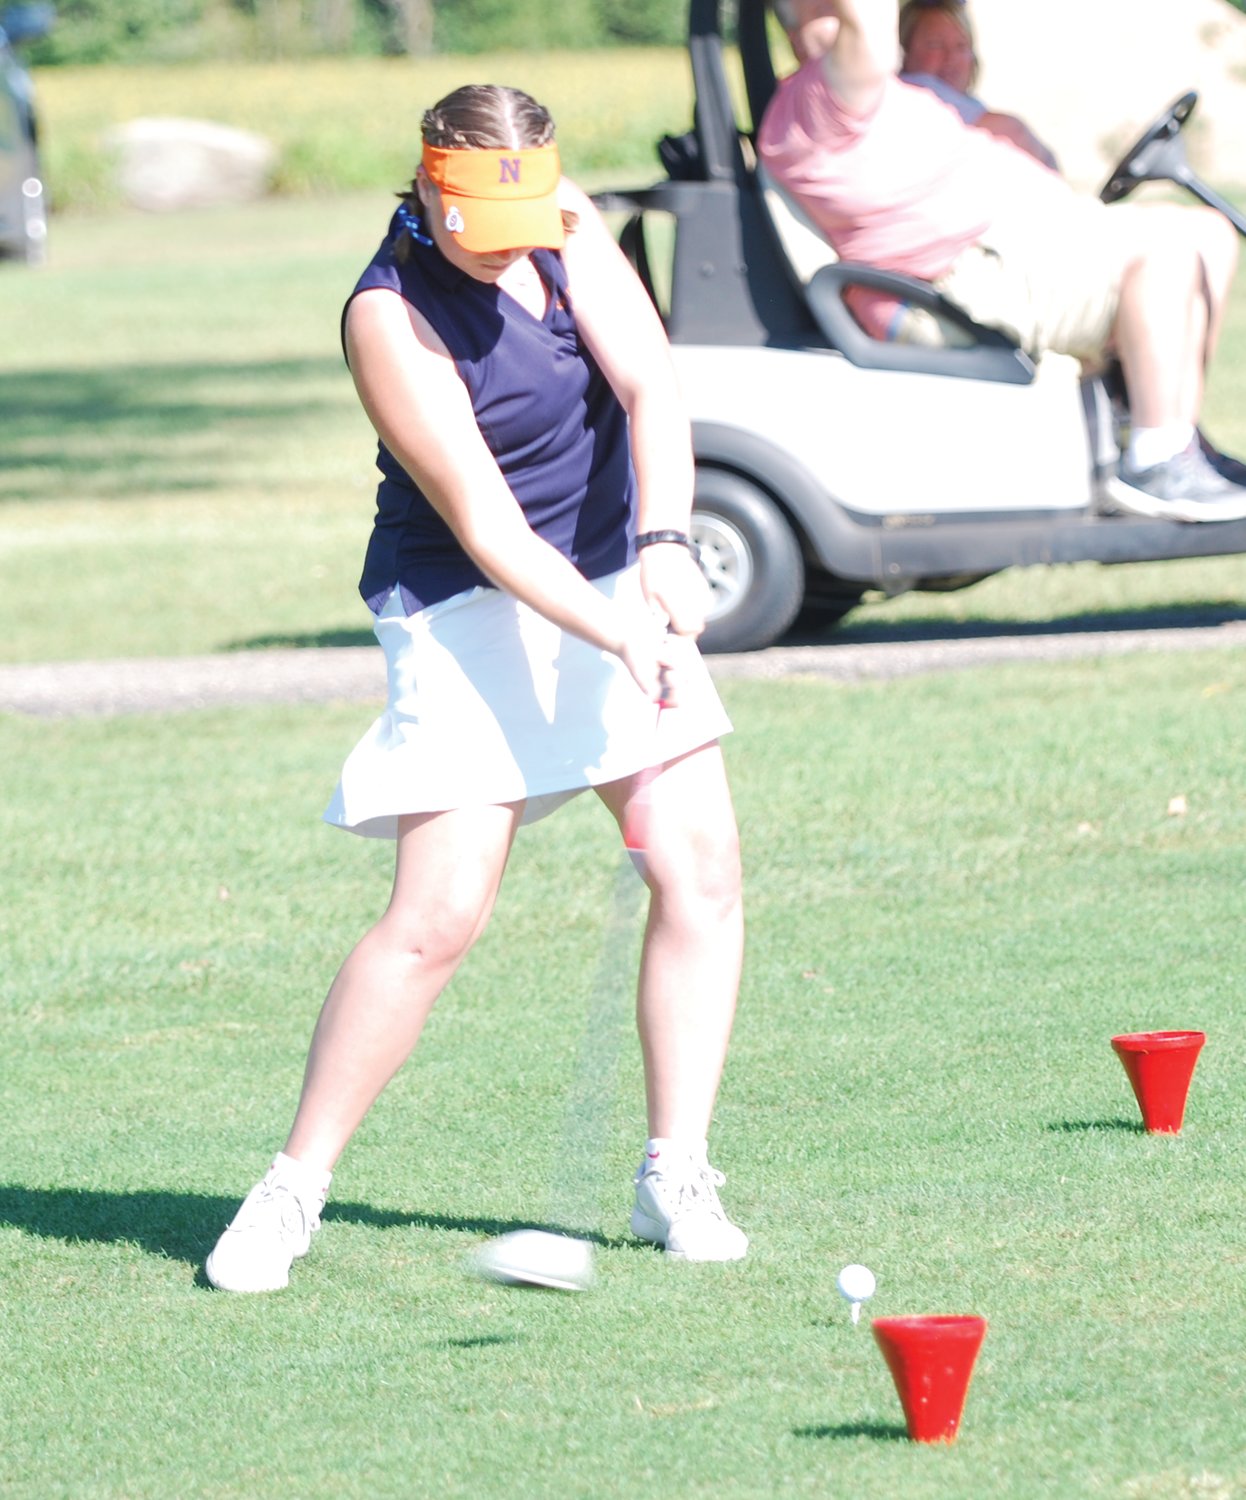 North Montgomery's Morgan Swick led the Chargers with a 51.